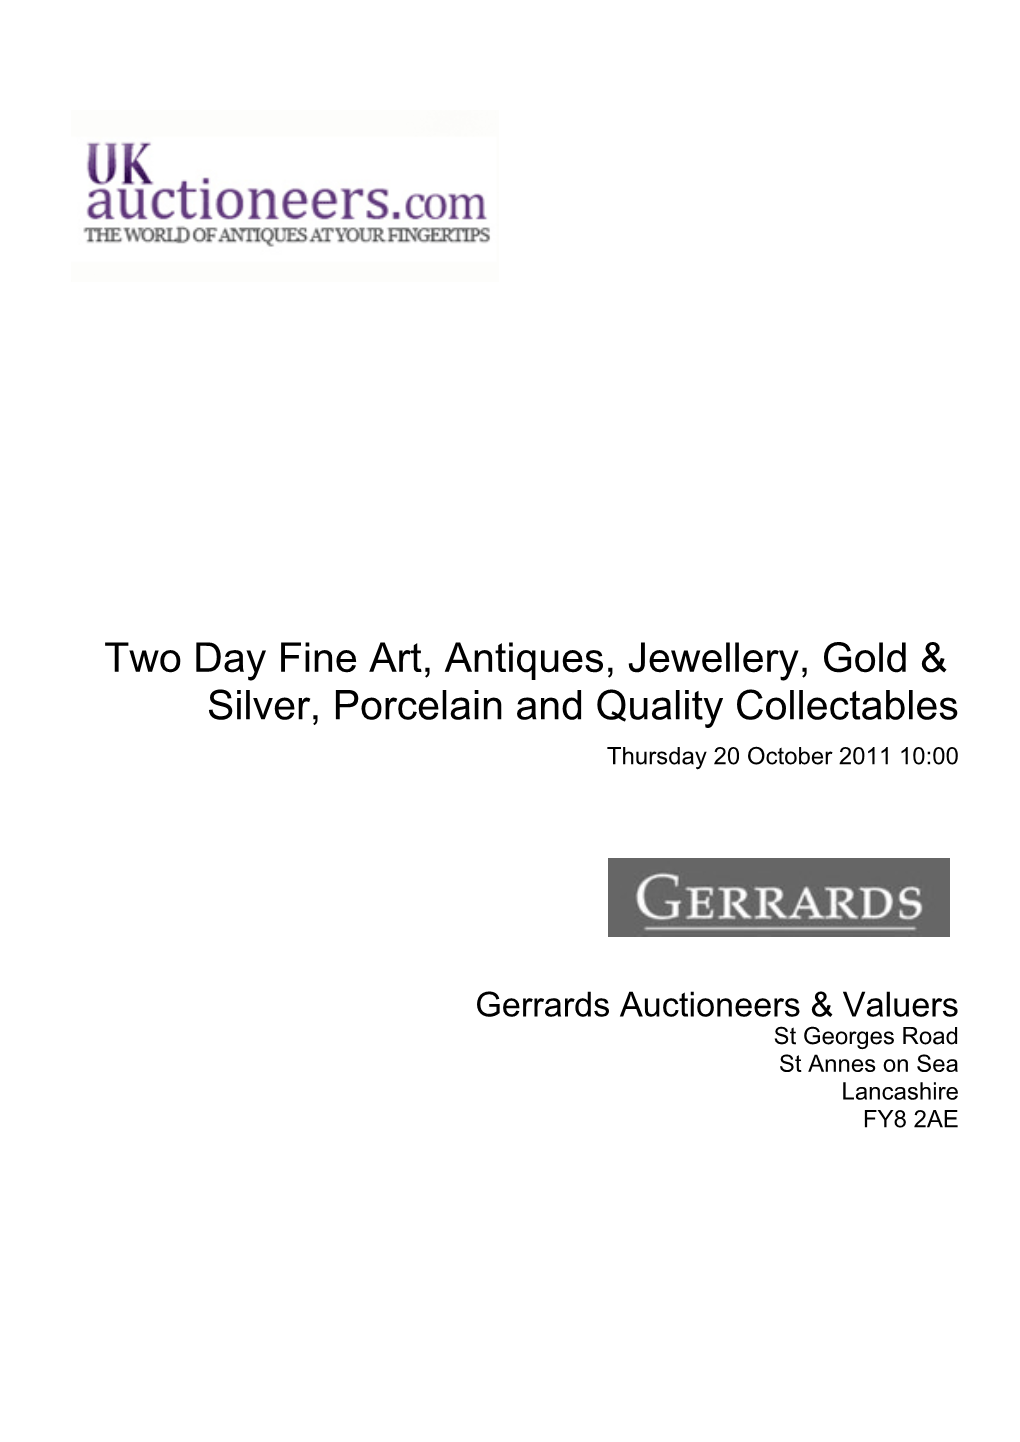 Two Day Fine Art, Antiques, Jewellery, Gold & Silver, Porcelain